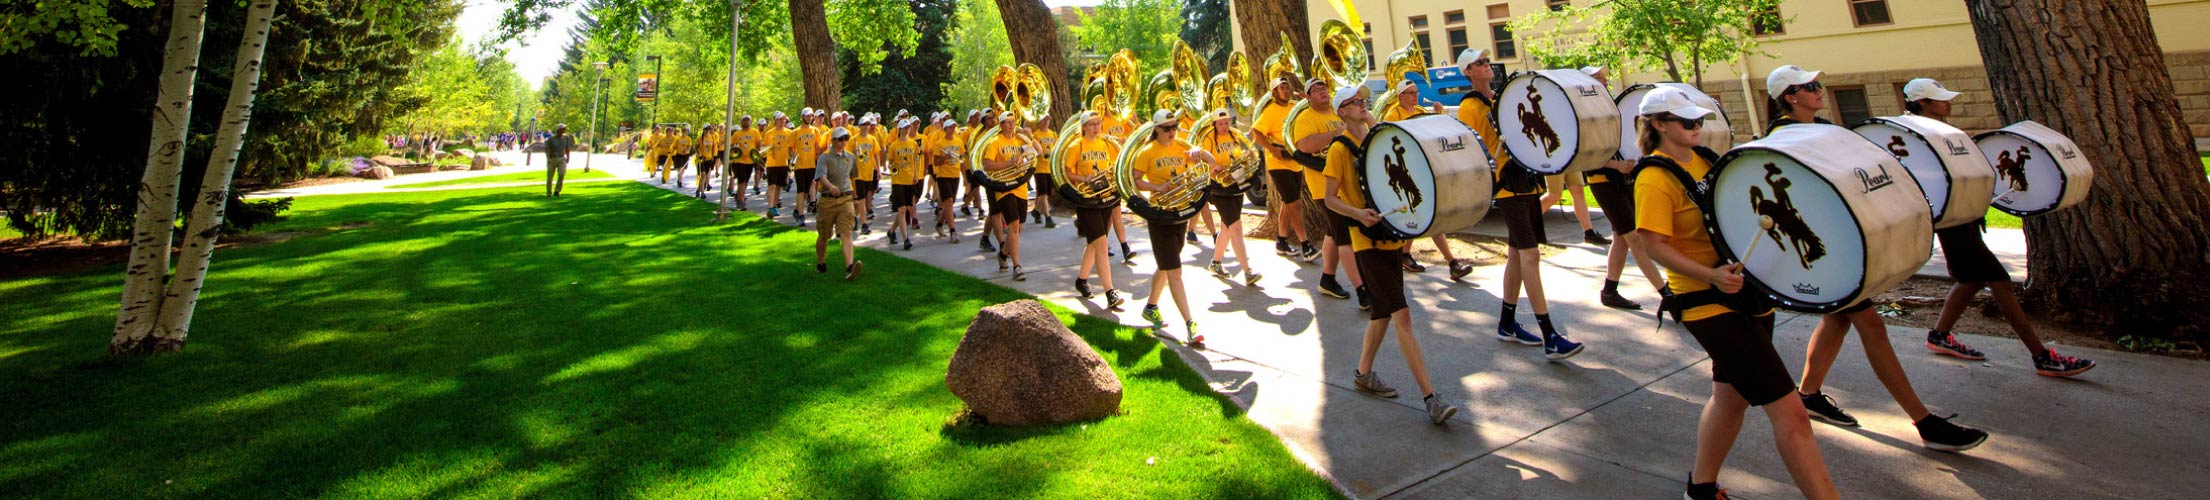 The UW student marching band plays on campus